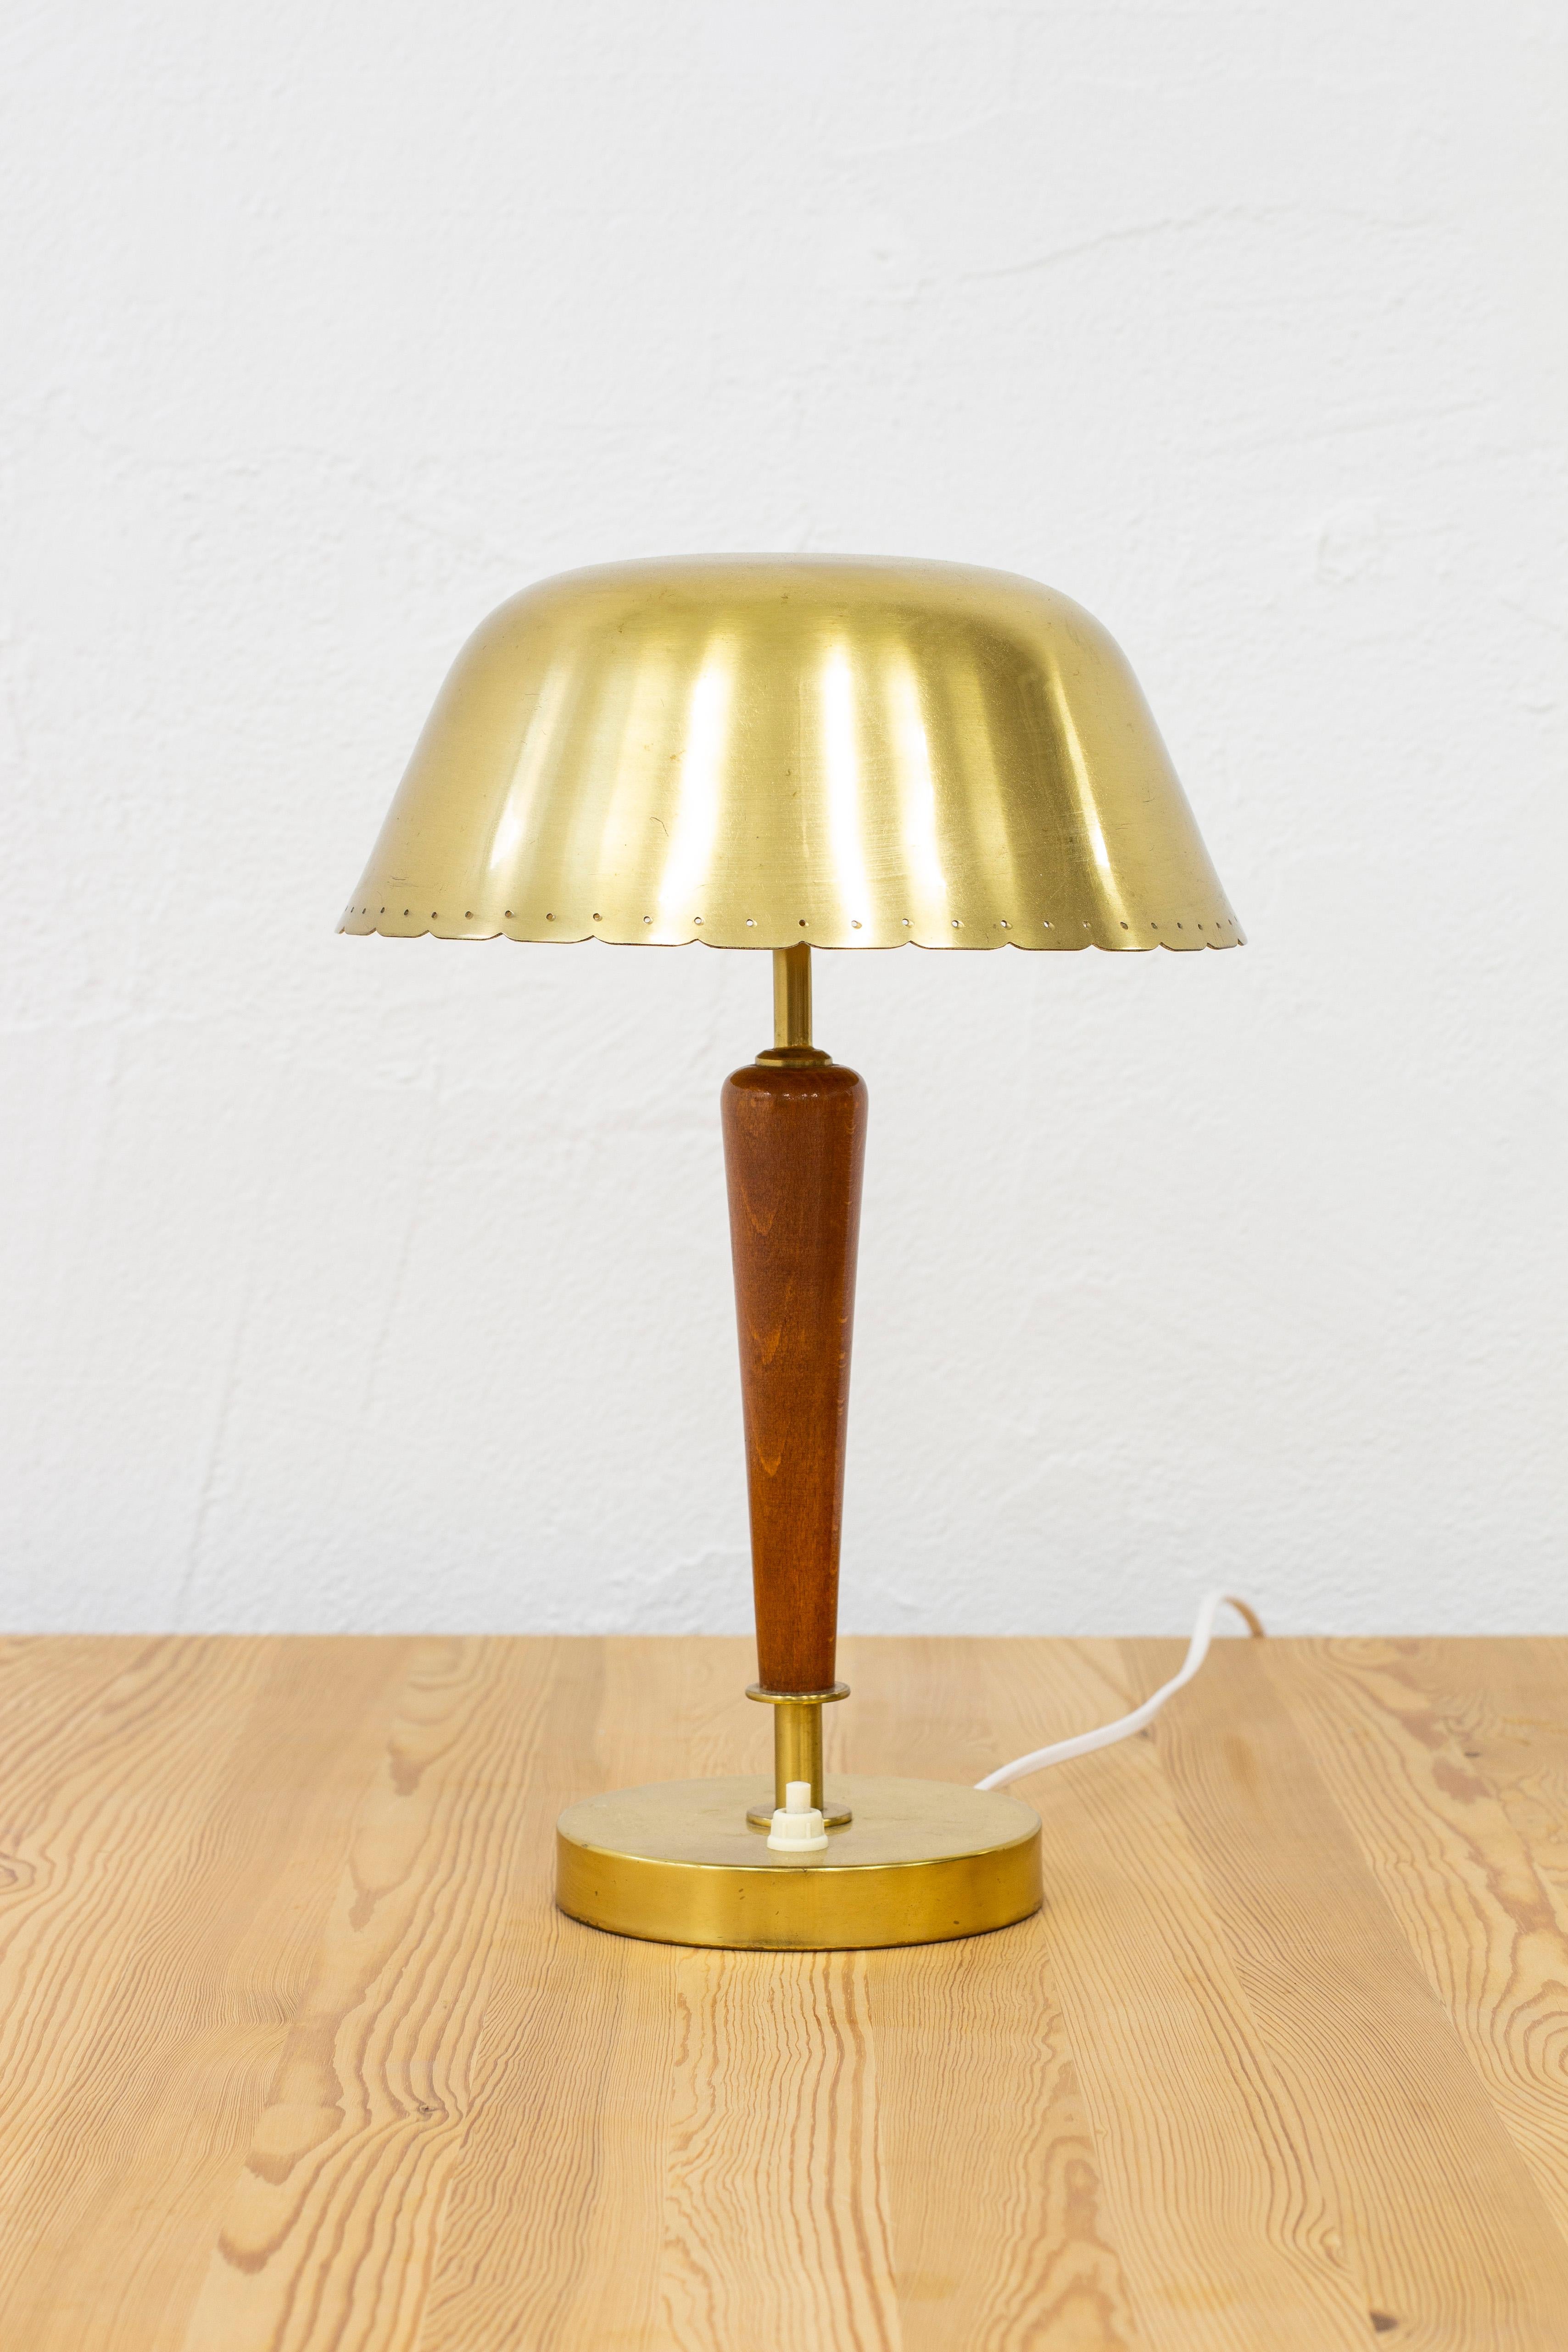 Table lamp designed and produced in Sweden, ca 1950s. Model number 1201, marked FNM. Made from brass and beech wood. Original light switch on the base in working order. Very good vintage condition with few signs of patina from age and use.

  